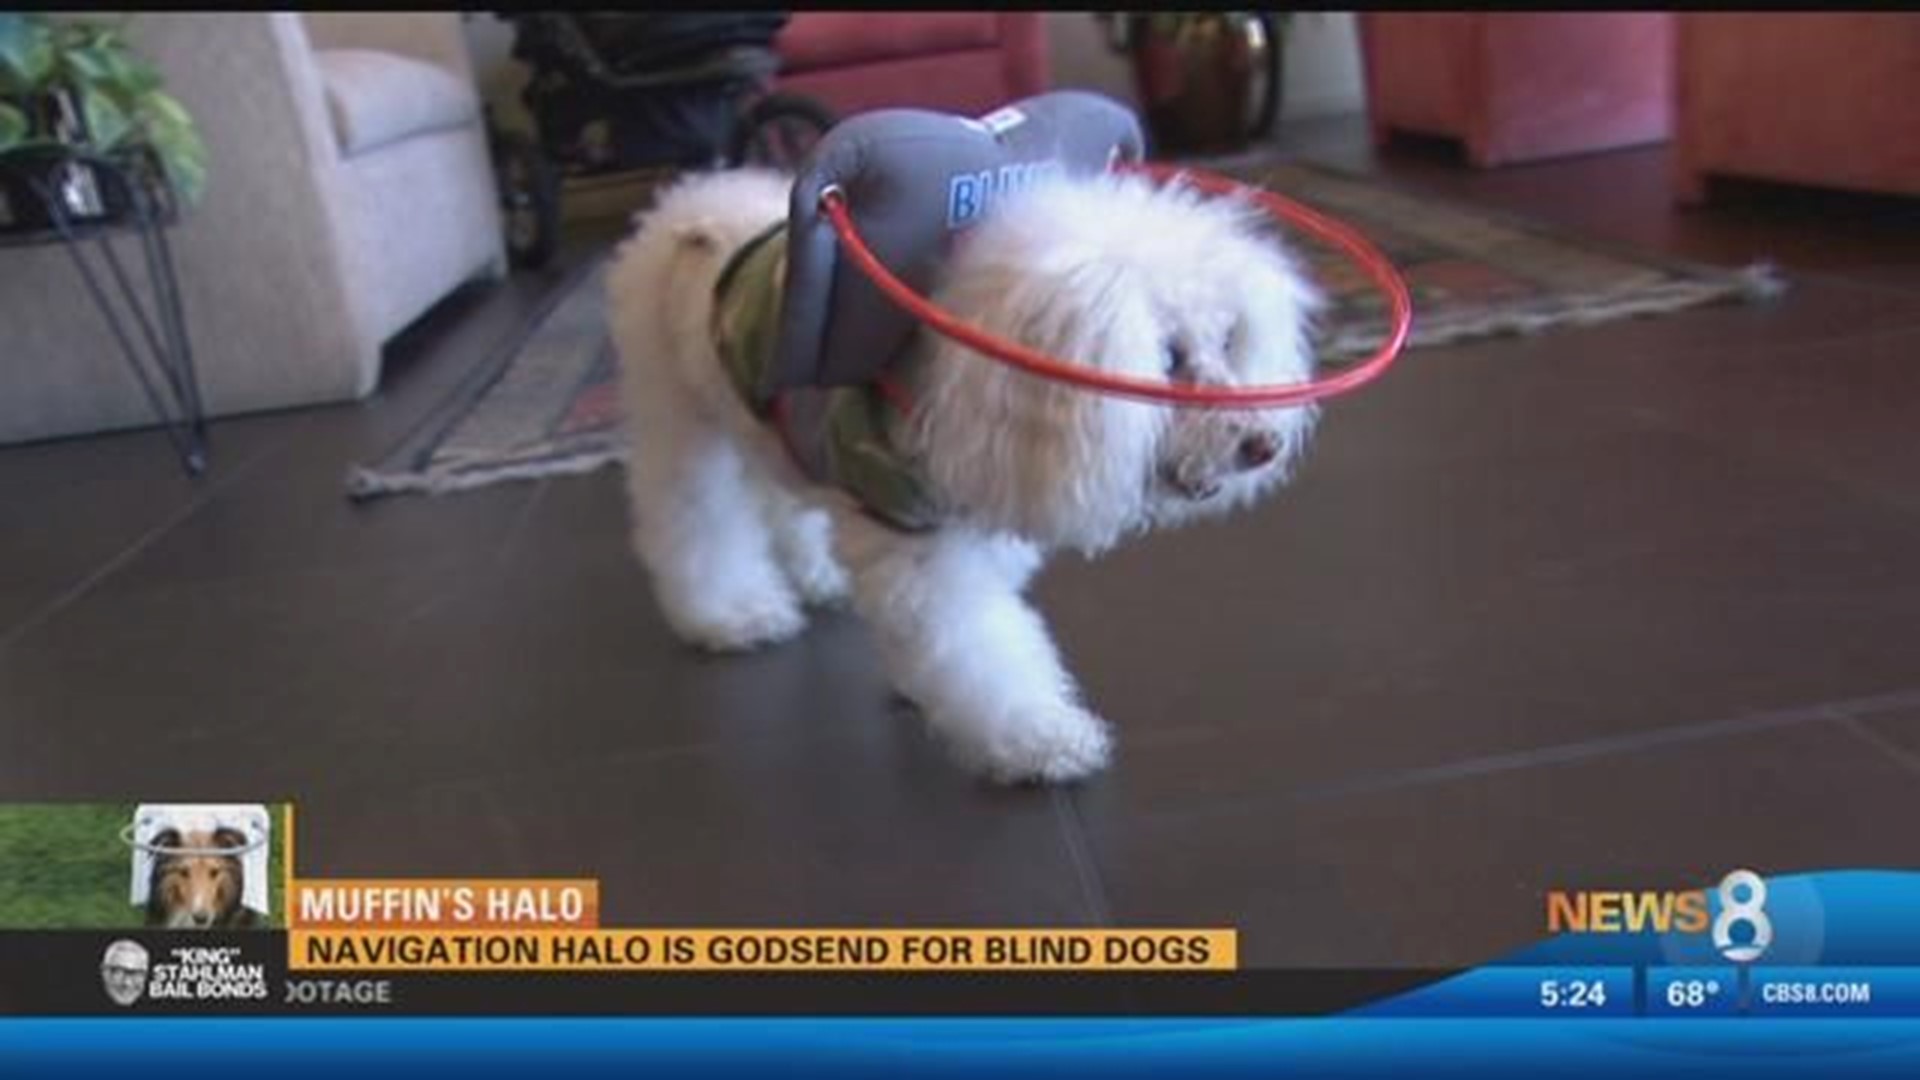 Muffin's Halo For Blind Dogs